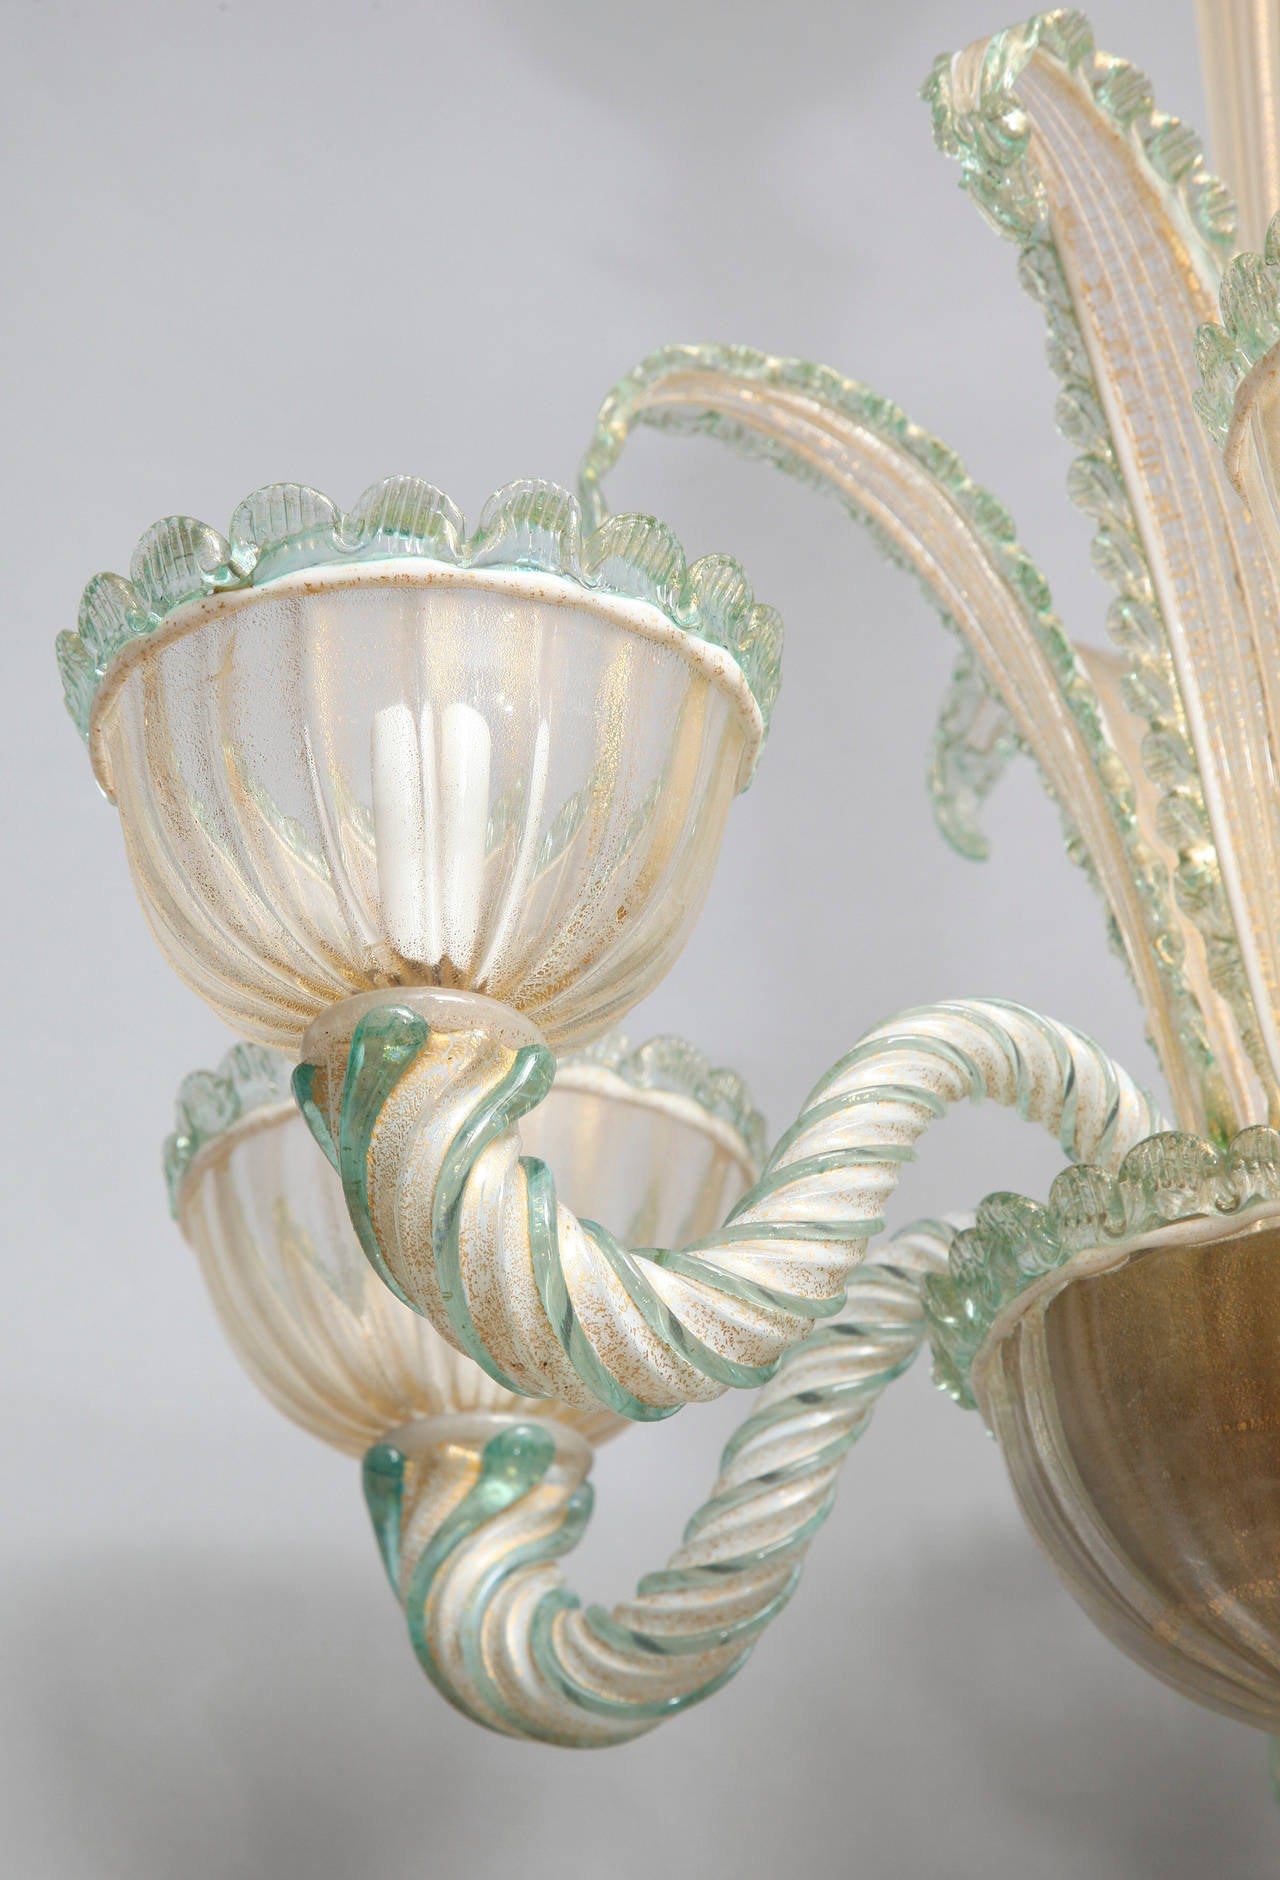 A six light Venetian Murano glass chandelier. The hand blown gold flecked glass with swirling green striped arms and rope detailed edges. The round tapering center stem attached to body issuing sprays of glass leaves.